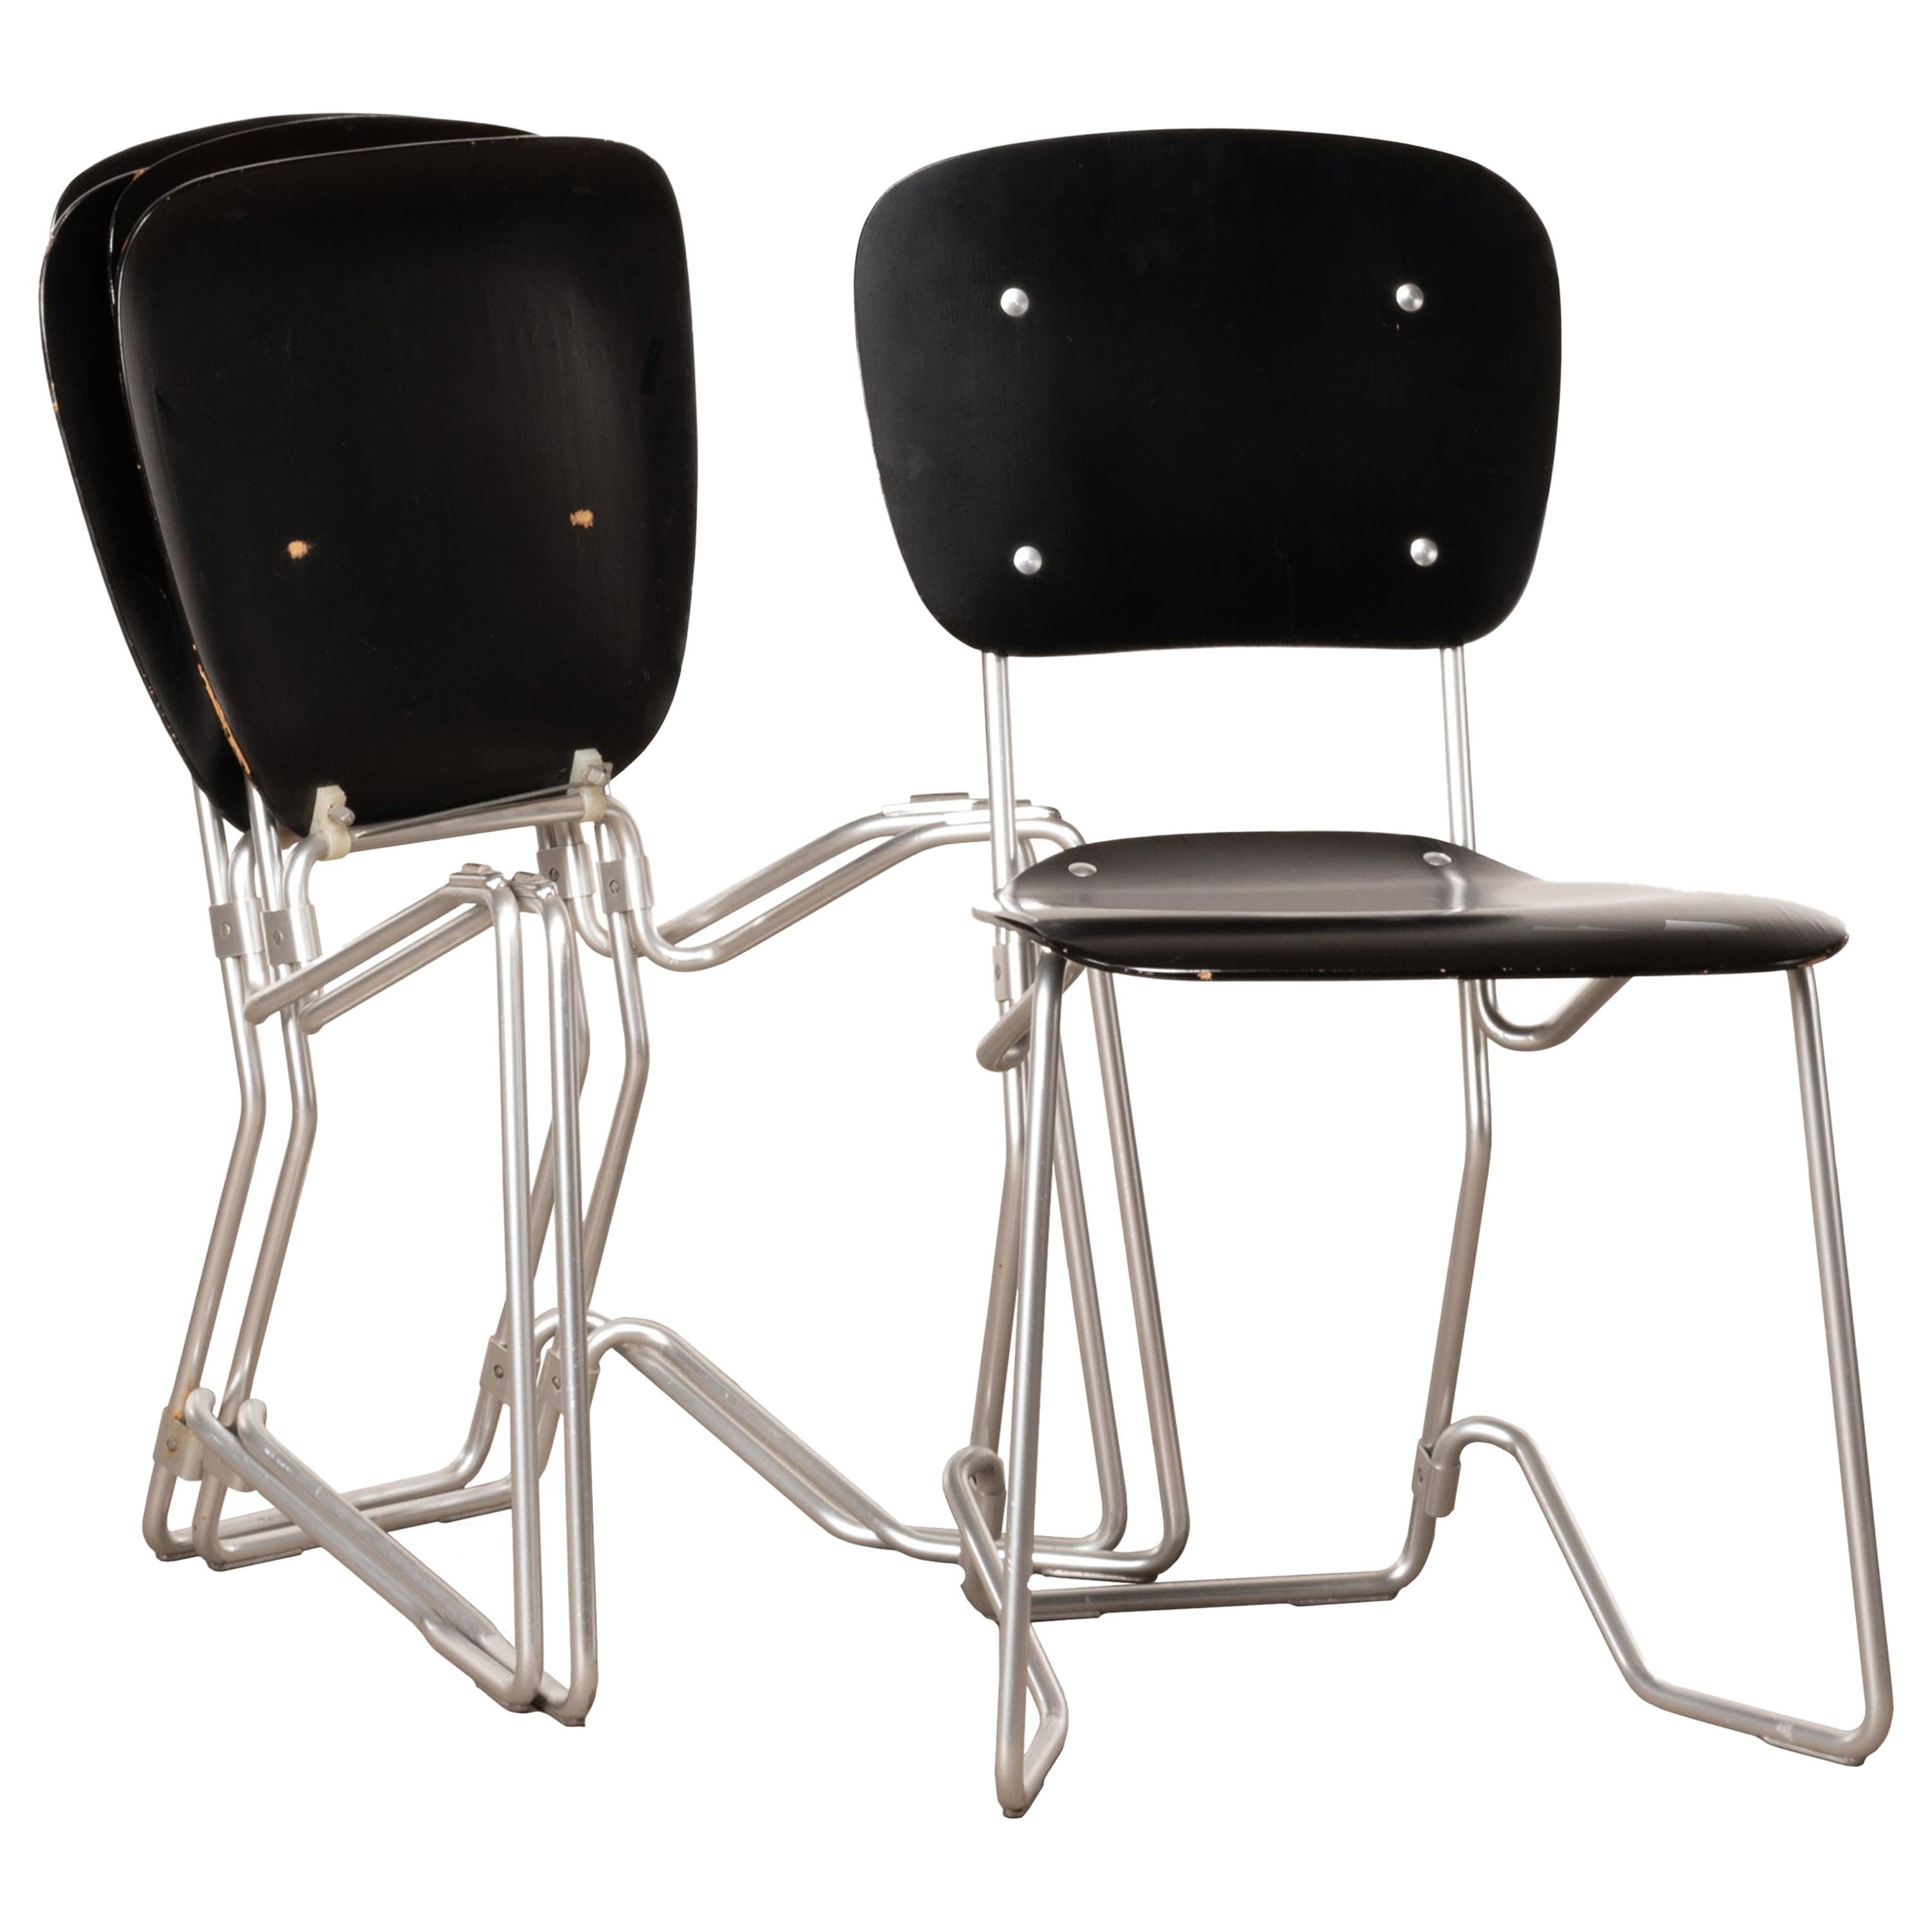 Armin Wirth Early Folding Stacking Chair in Black Plywood / Aluminum for Aluflex